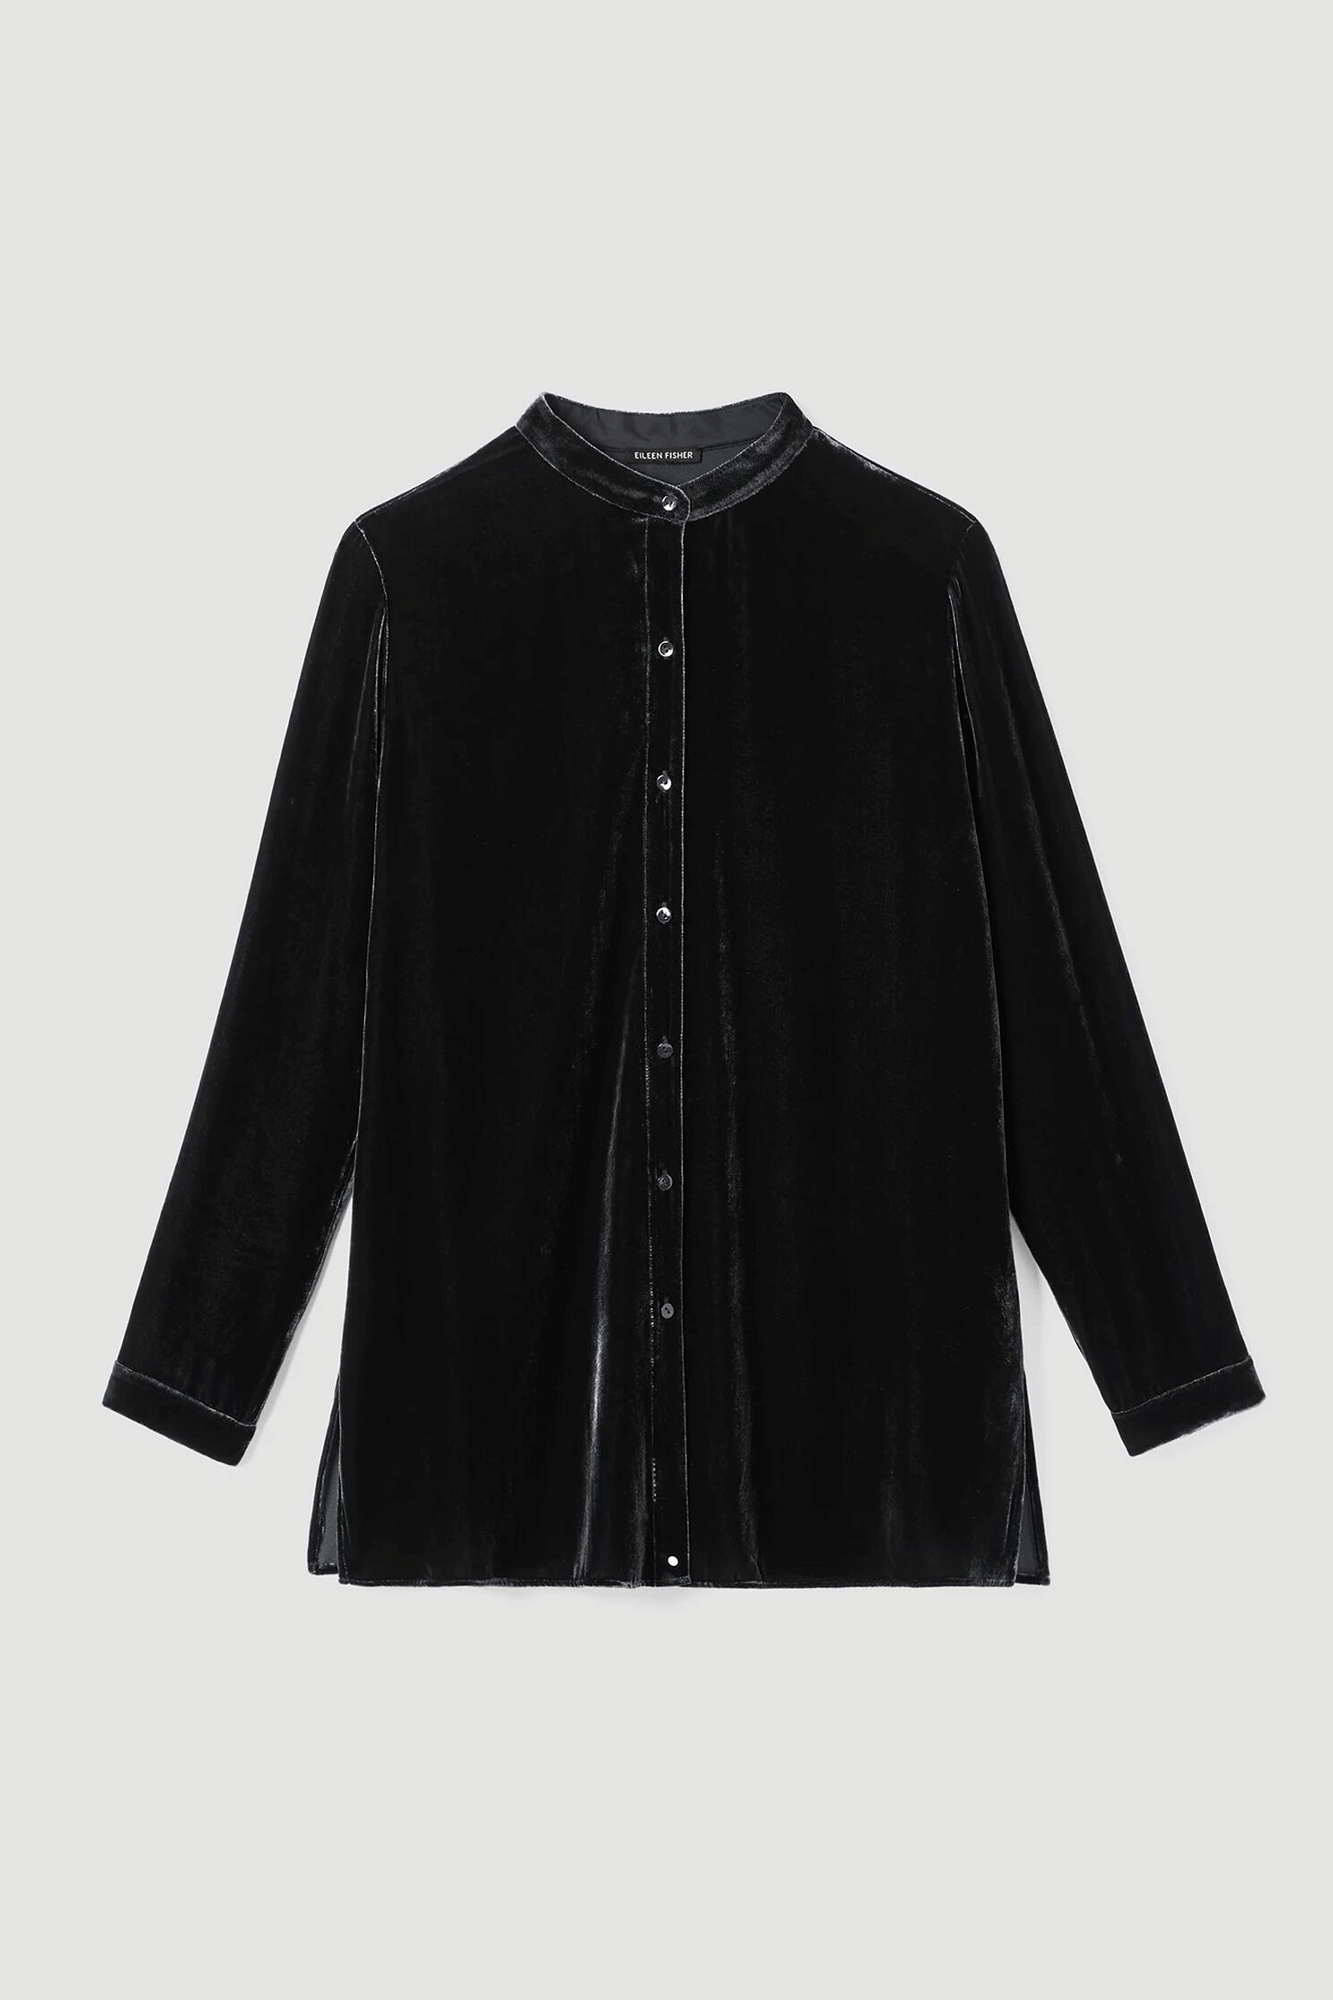 This Mandarin Collar Long Shirt from Eileen Fisher brings timeless elegance to your wardrobe. Crafted from a luxurious blend of velvet and silk, it features a band collar with shirring at the back and side slits for a comfortable fit. Perfect for making a statement this season.